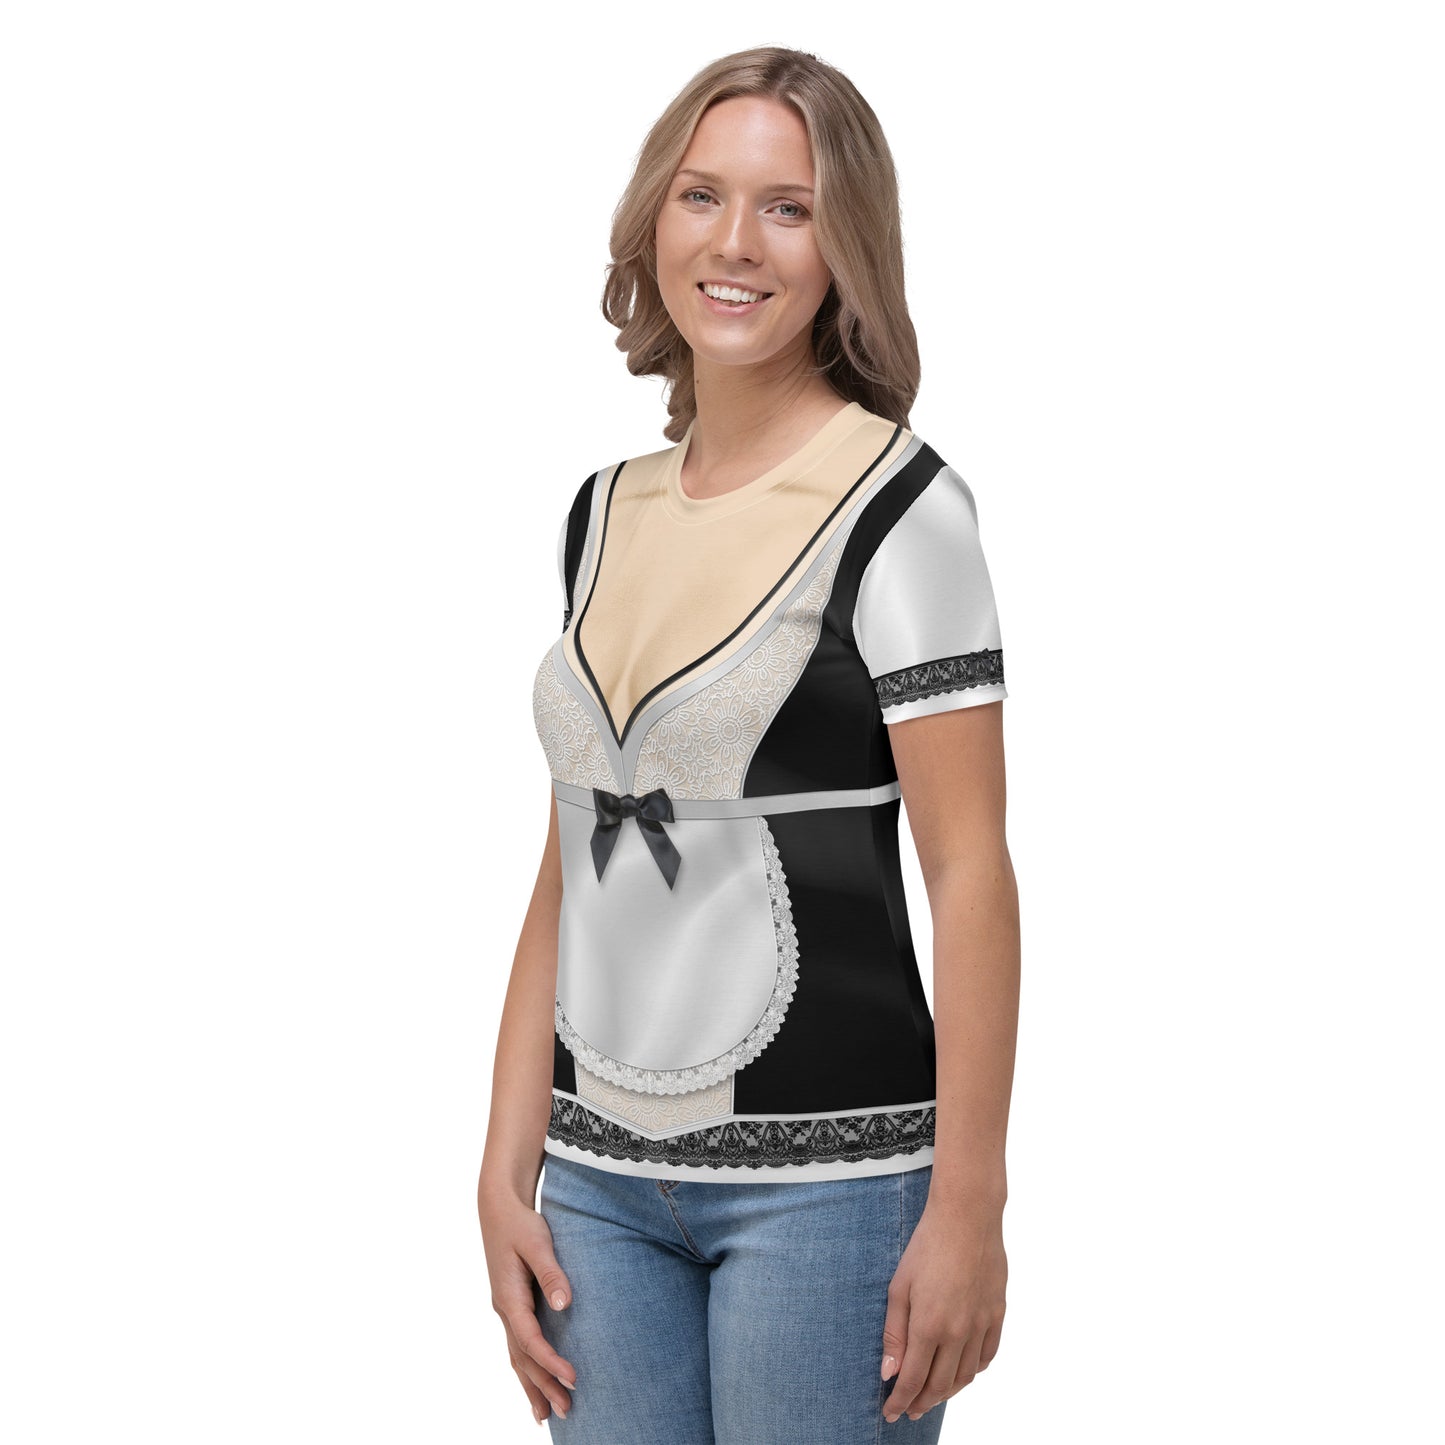 Pajamgeries Women's T-shirt - French Maid - Ivory